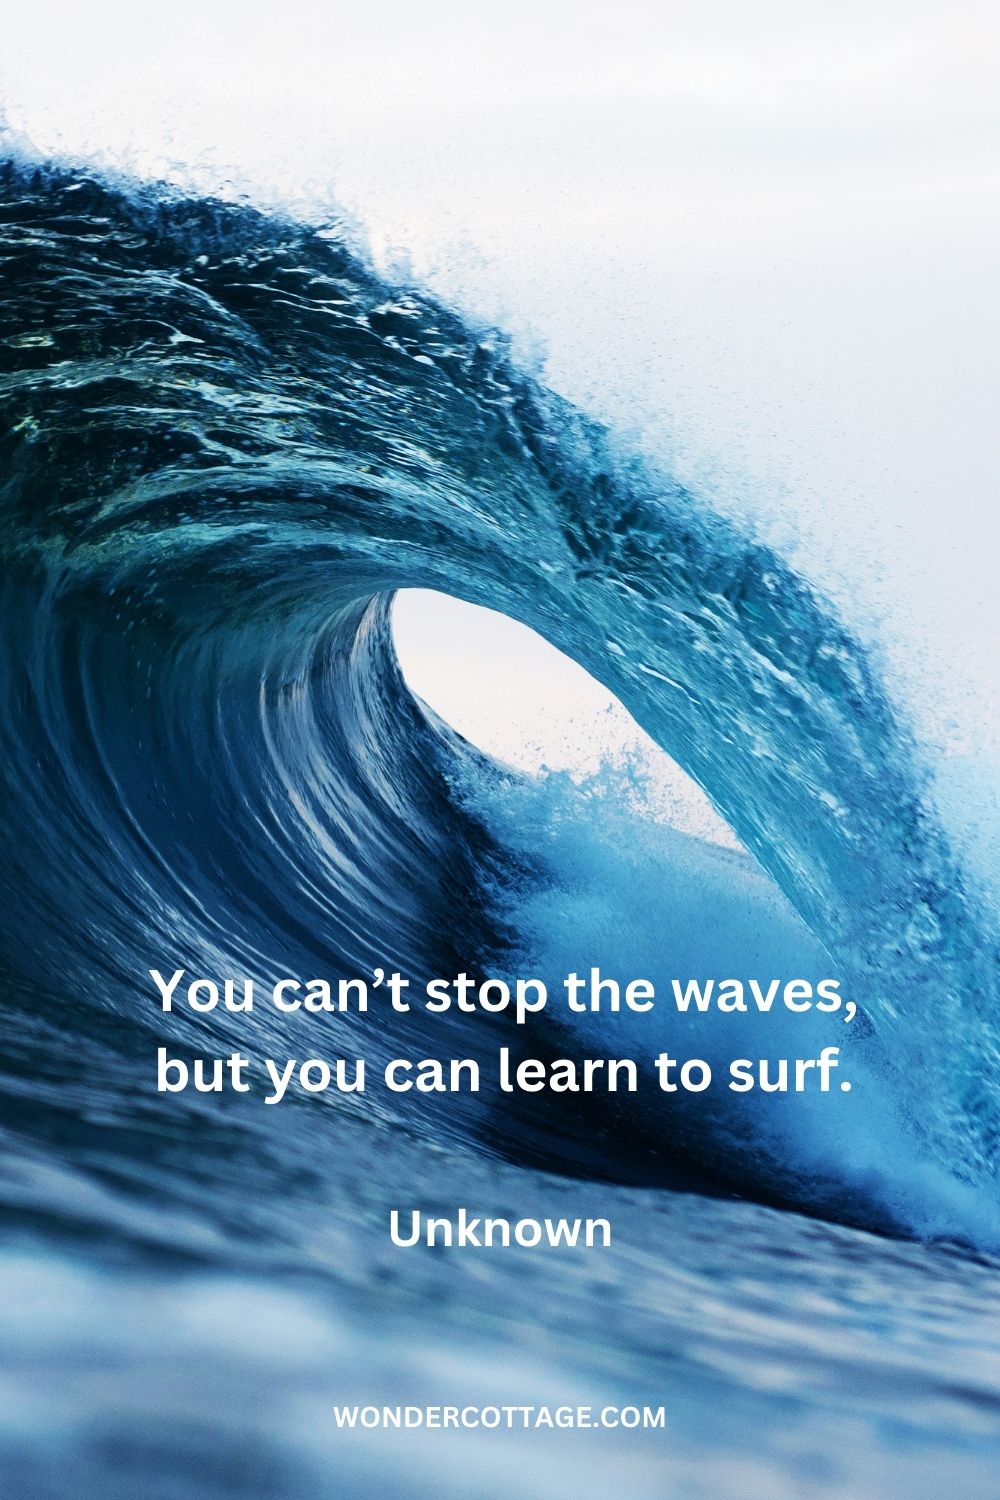 You can’t stop the waves, but you can learn to surf. Unknown